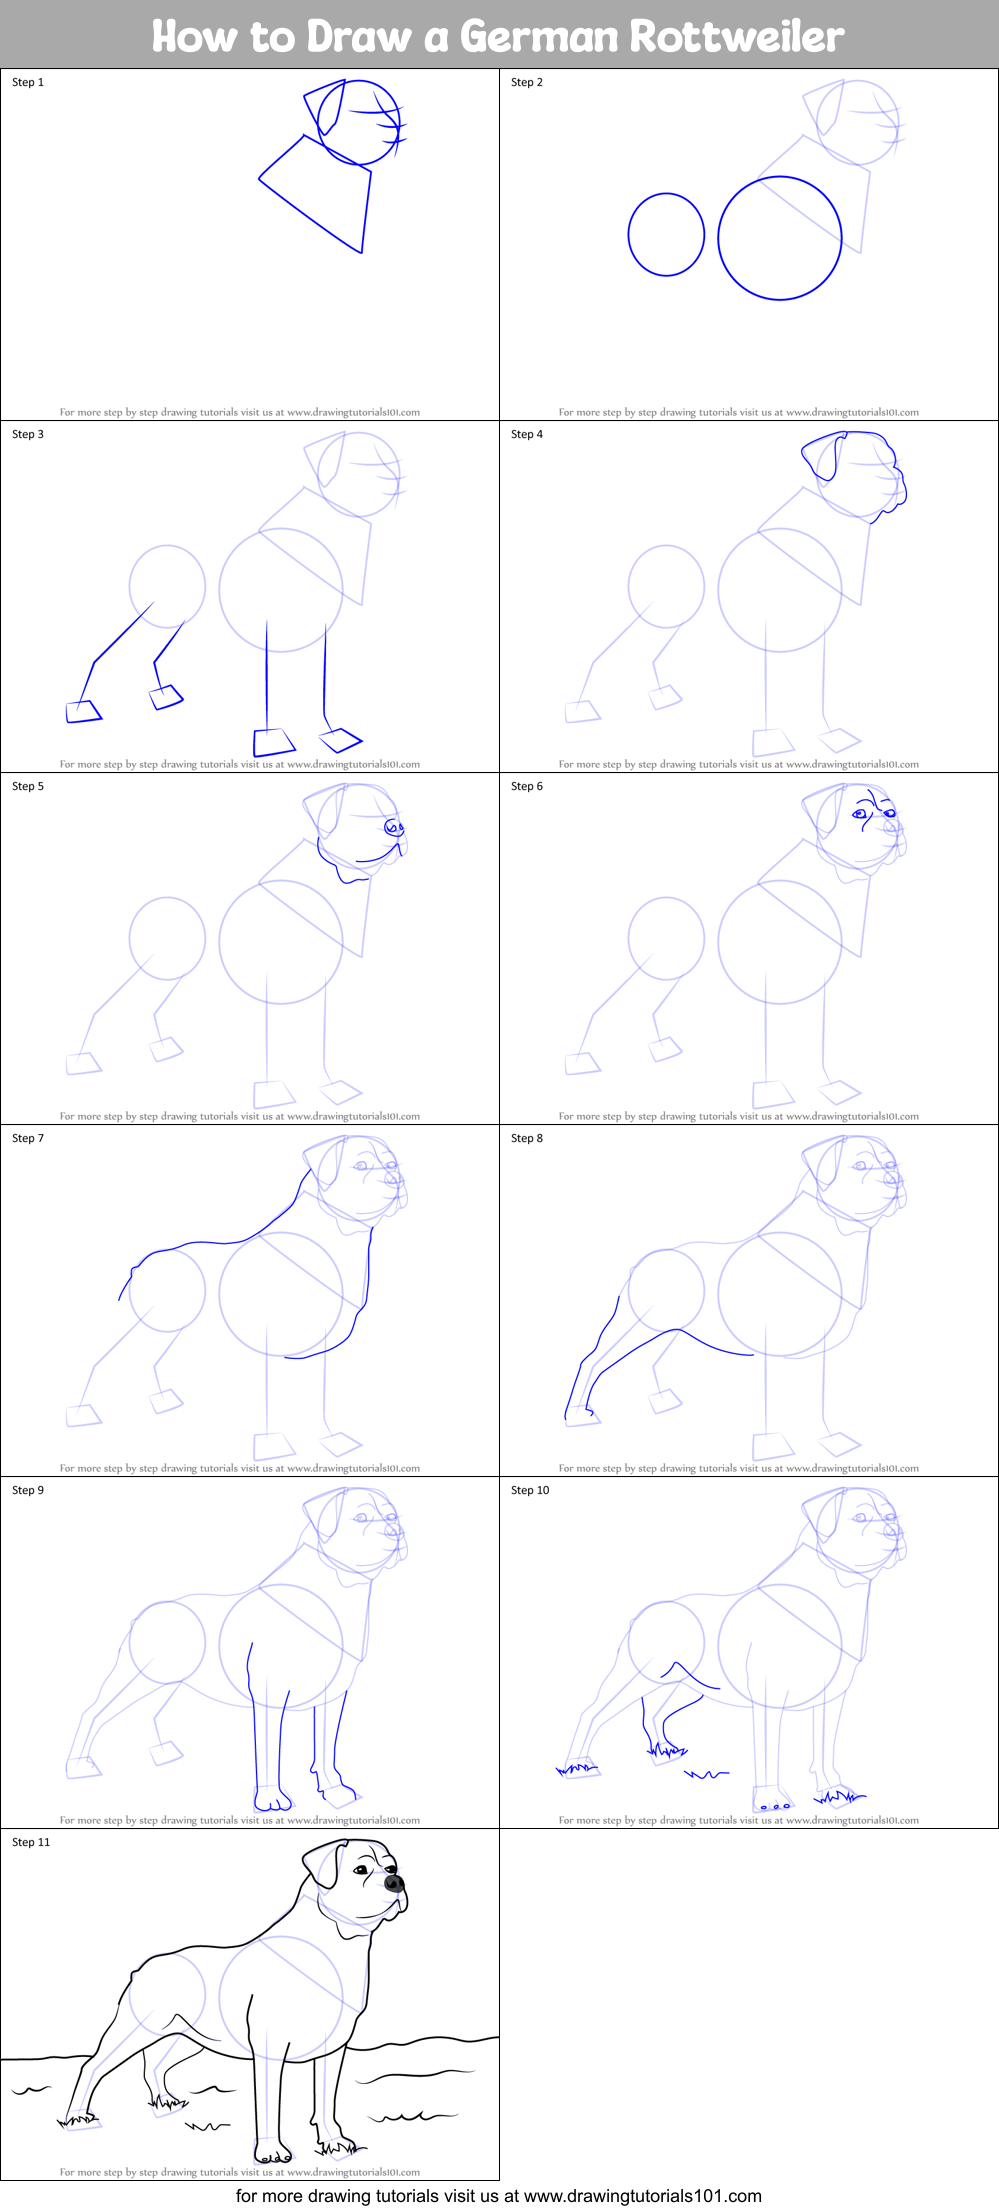 How to Draw a German Rottweiler printable step by step drawing sheet